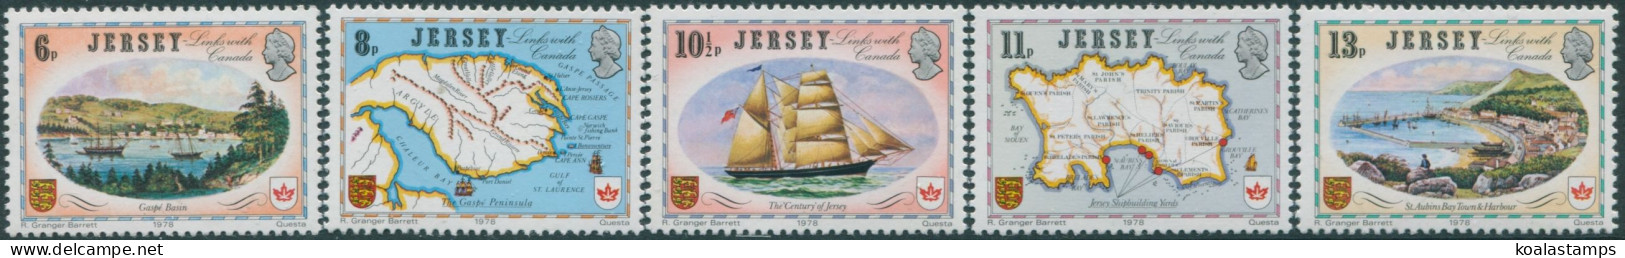 Jersey 1978 SG190-194 Links With Canada Set MNH - Jersey